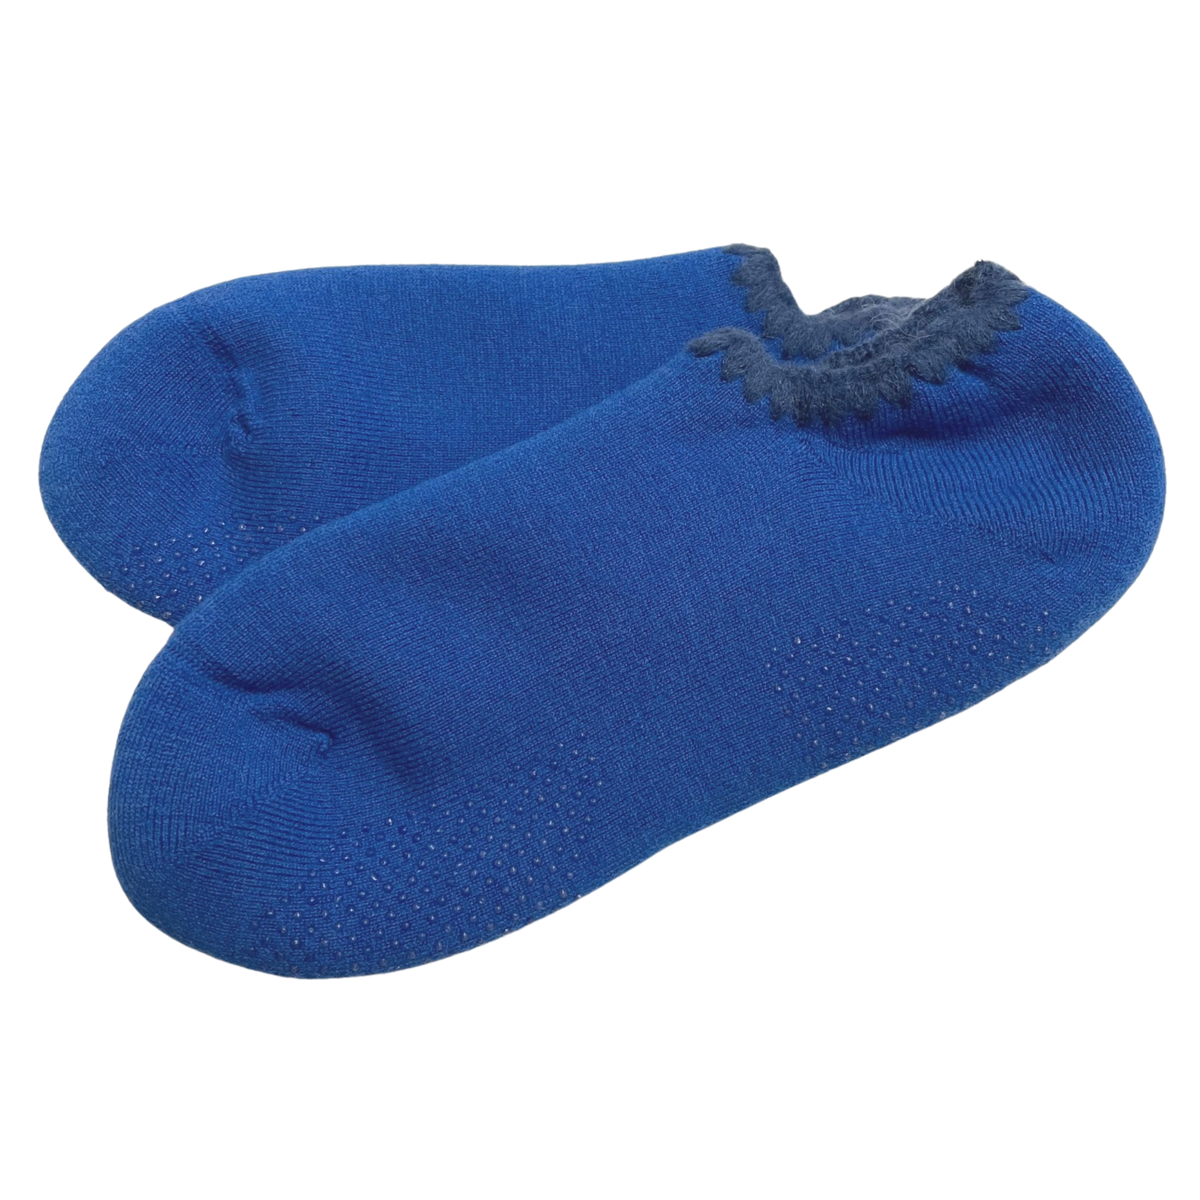 Handcrafted Wool Slipper Socks with Grips | LARGE | 8 Colors - CHERRYSTONEstyle